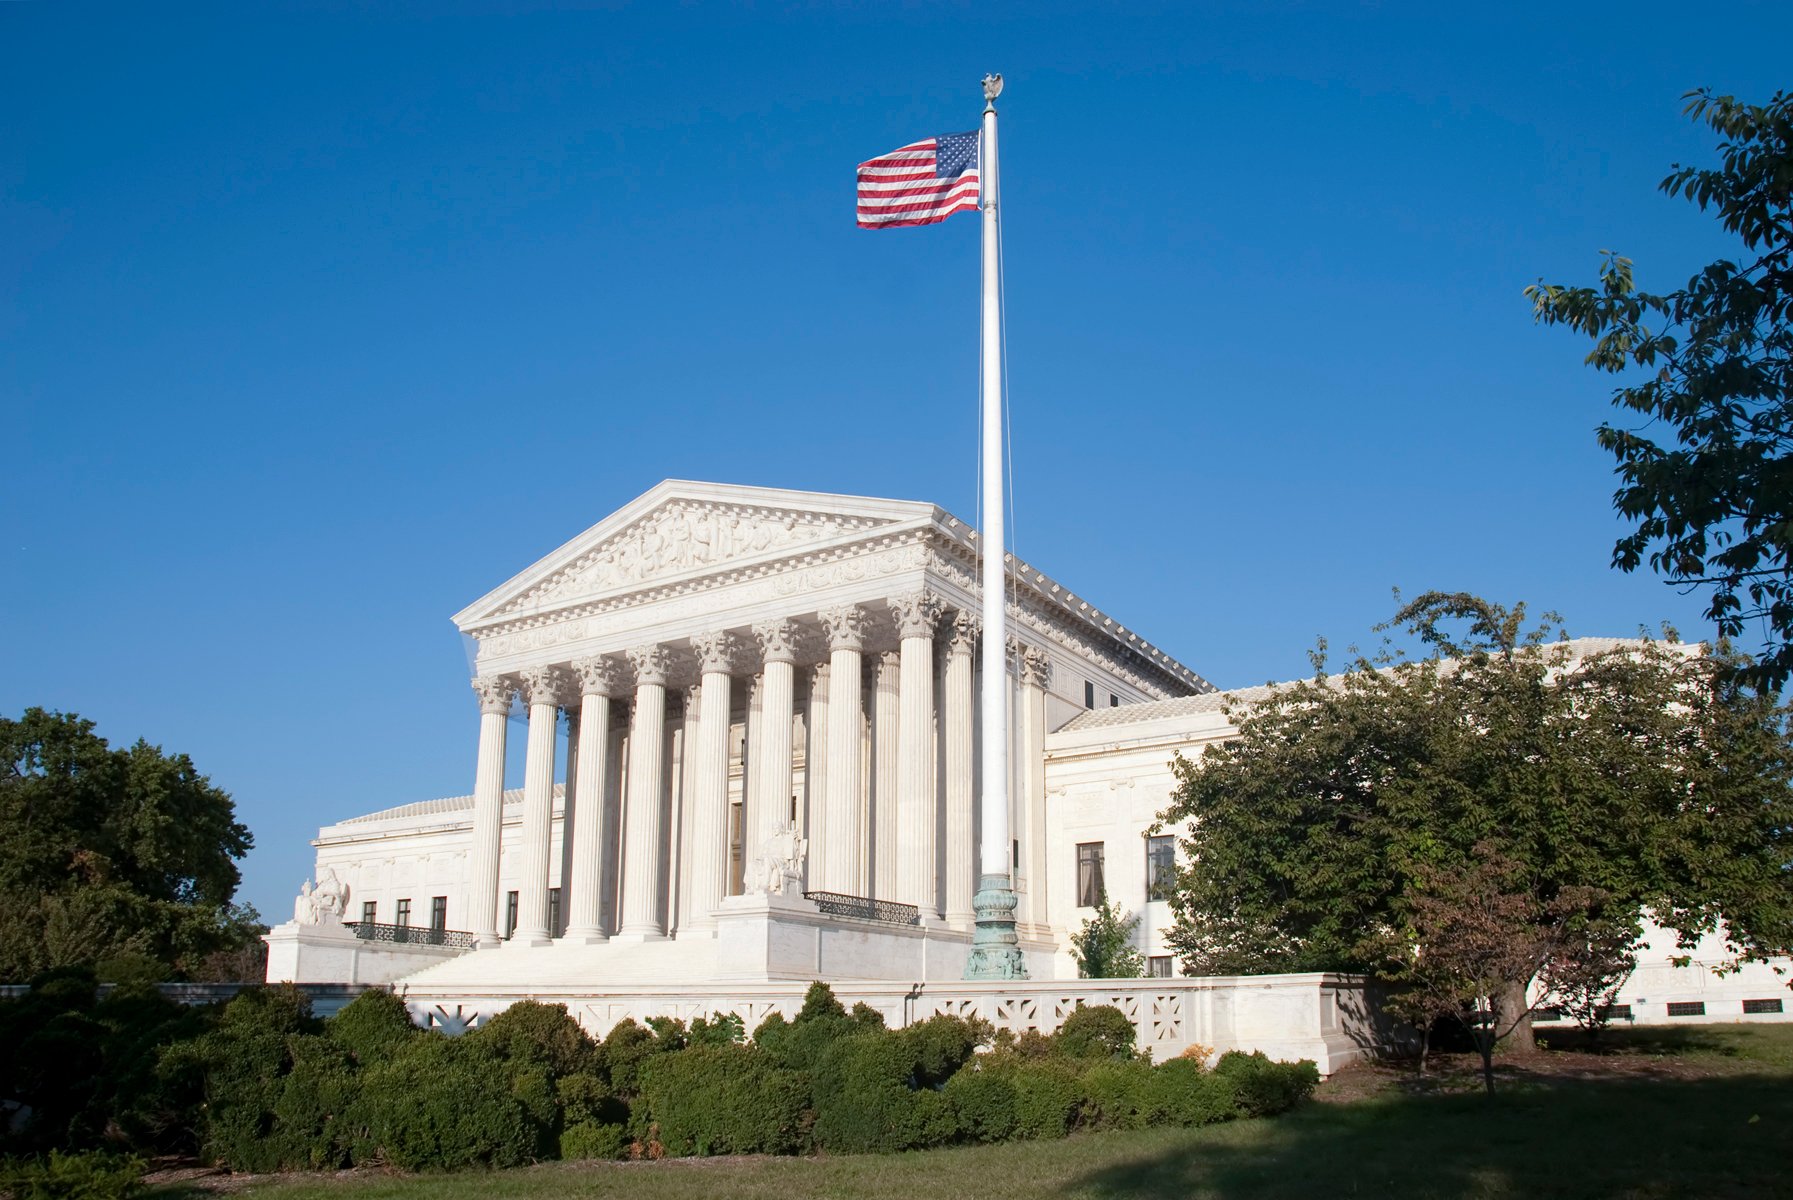 Is the US Supreme Court’s code of conduct effective? We investigate.